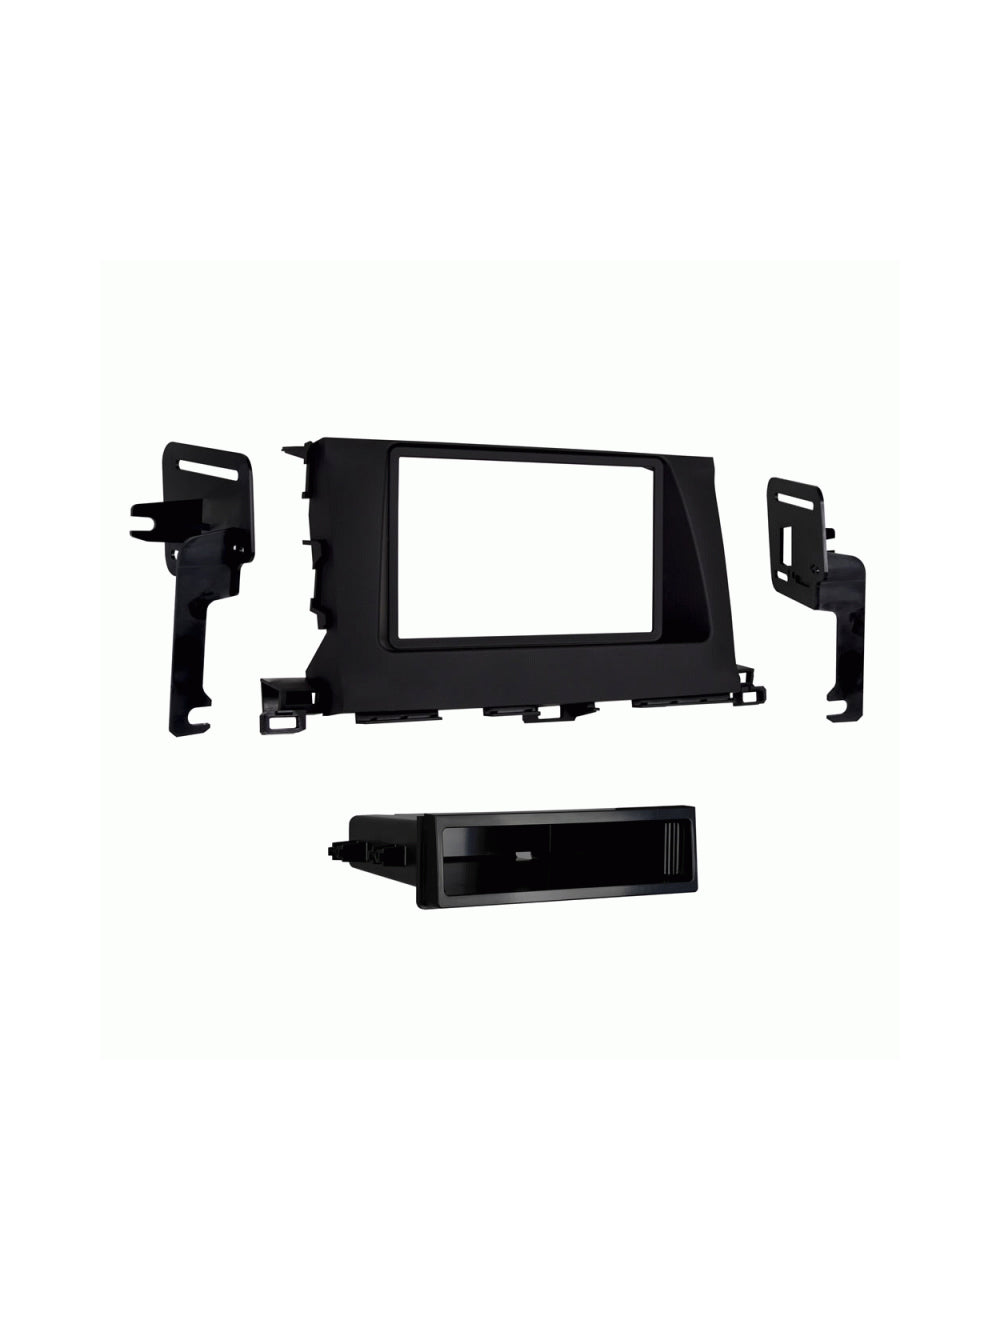 Metra 99-8248B Single or Double DIN Dash Kit for Select 2014-Up Toyota Highlander Vehicles